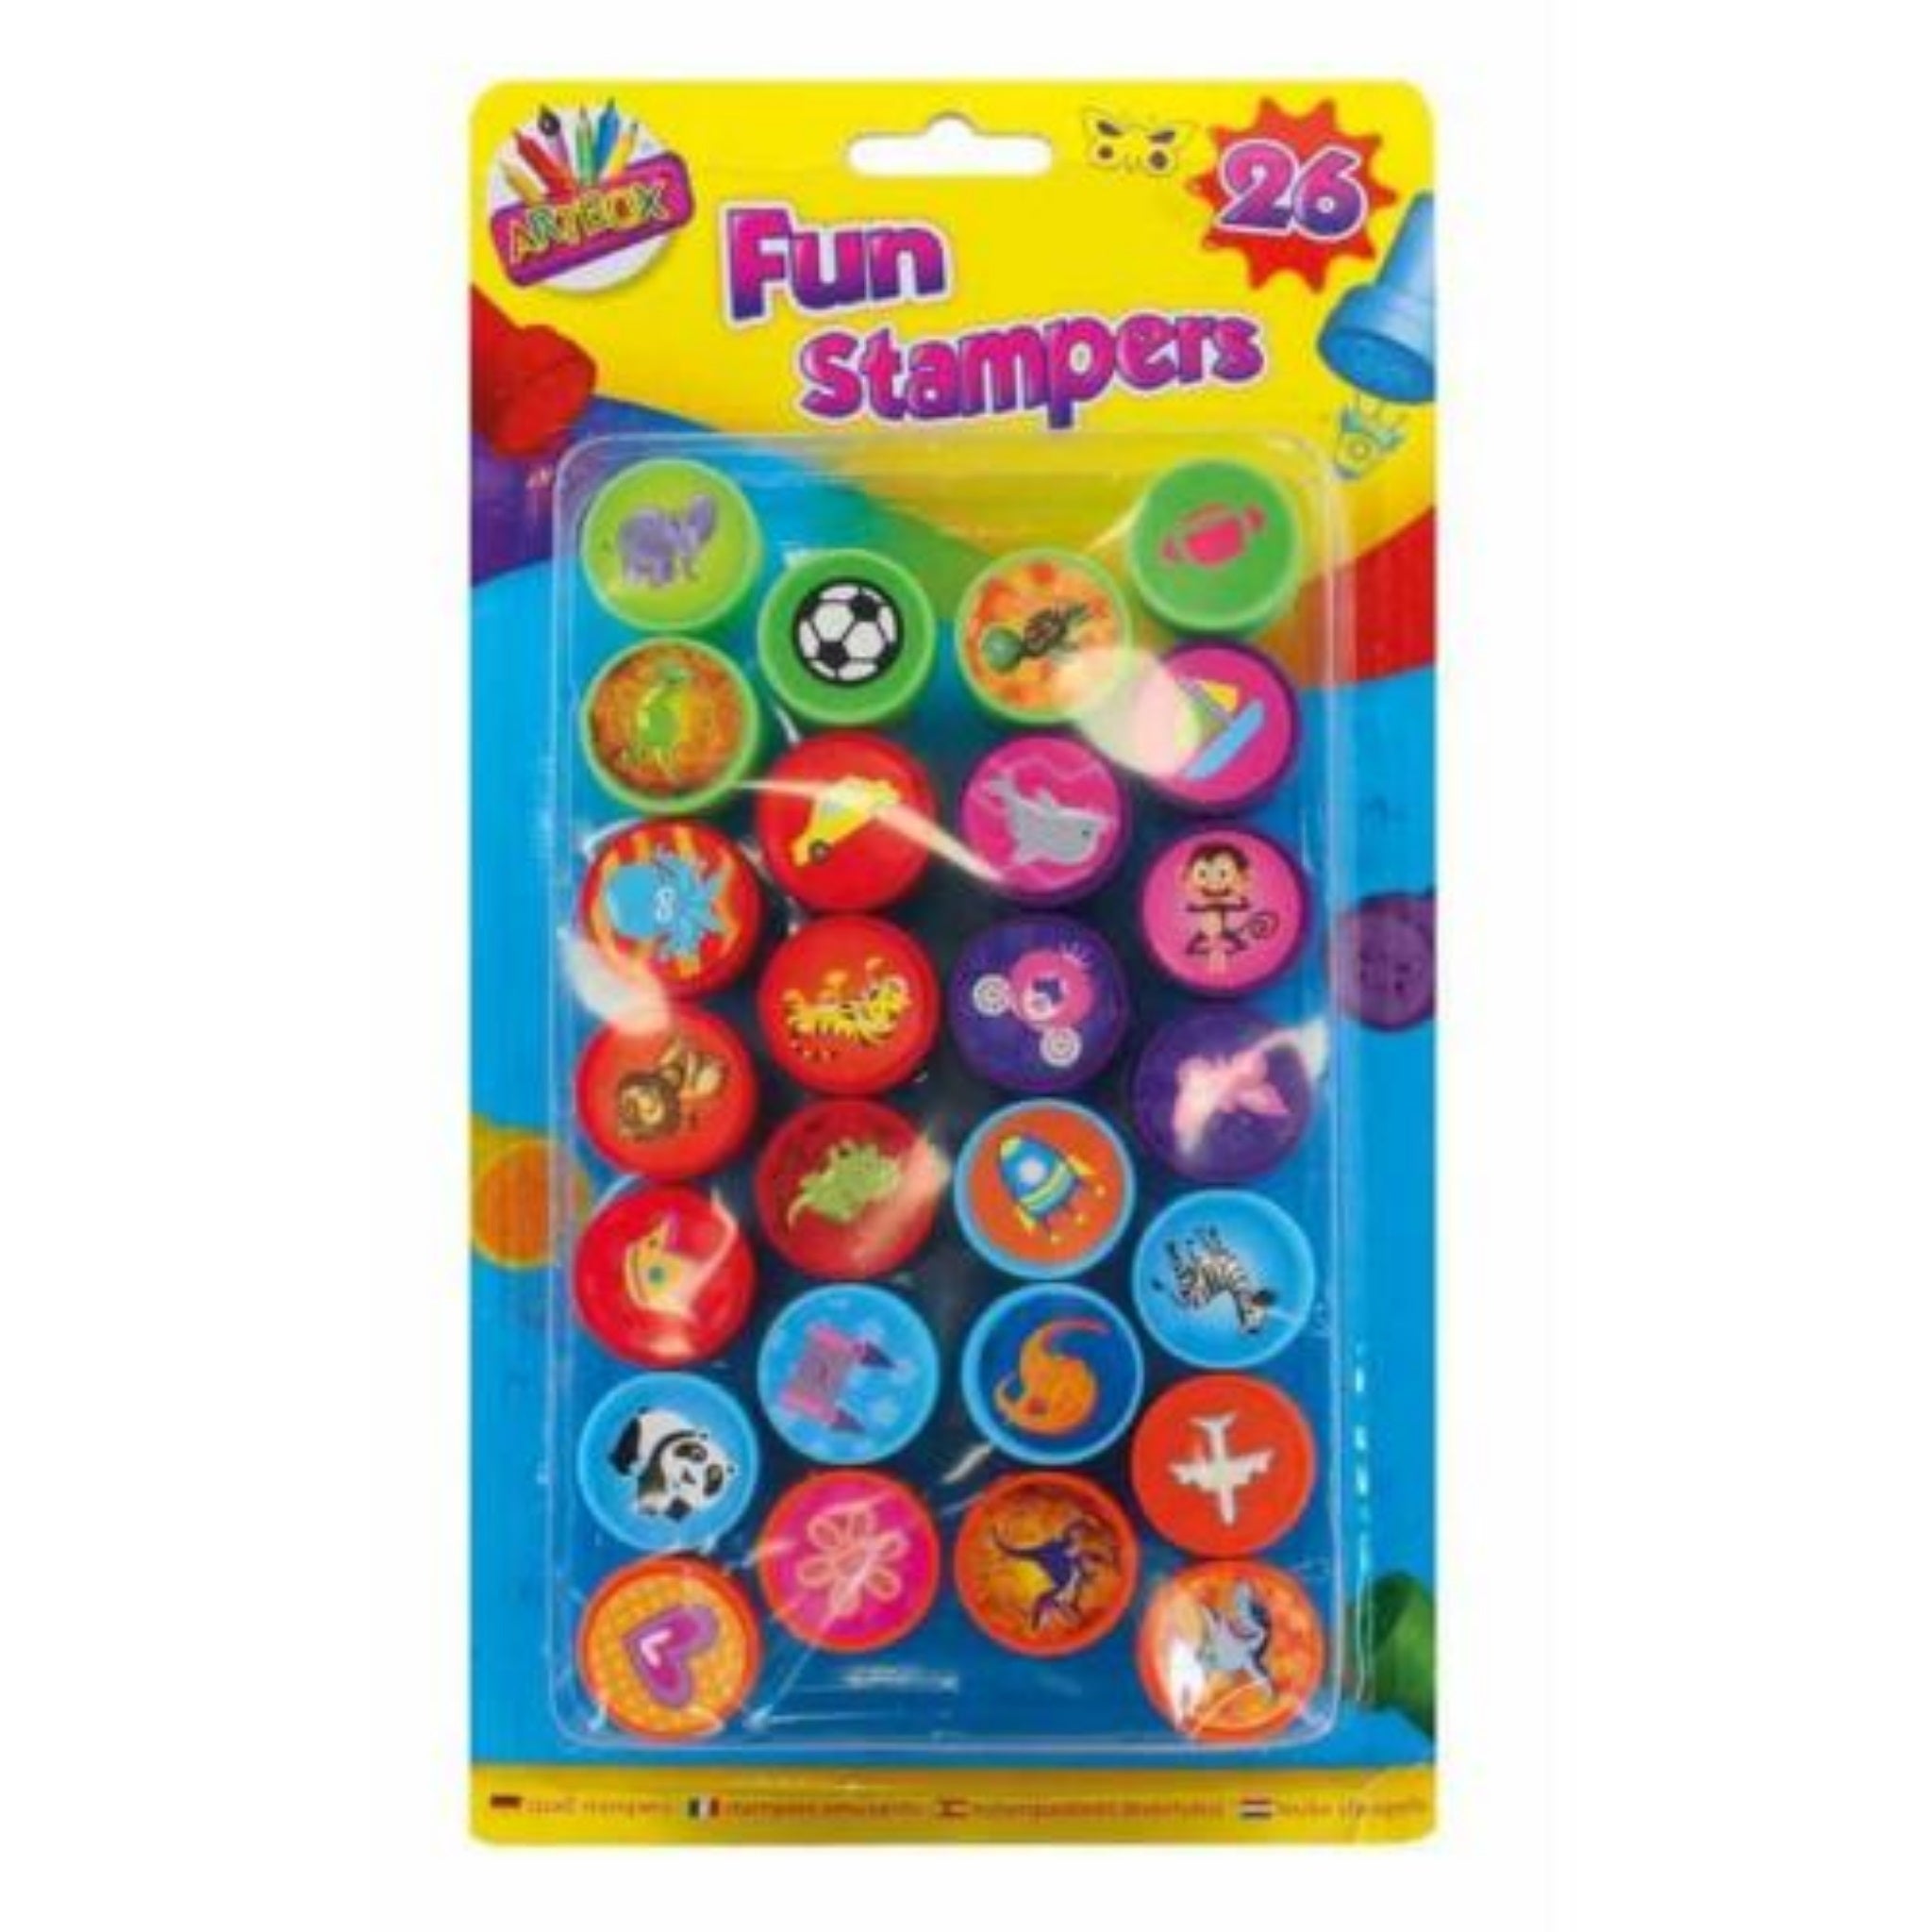 Beclen Harp 26Pc Fun Stampers Animal Cartoon Shape Assorted Stamps Set Kids Craft Self Ink Learning Colours